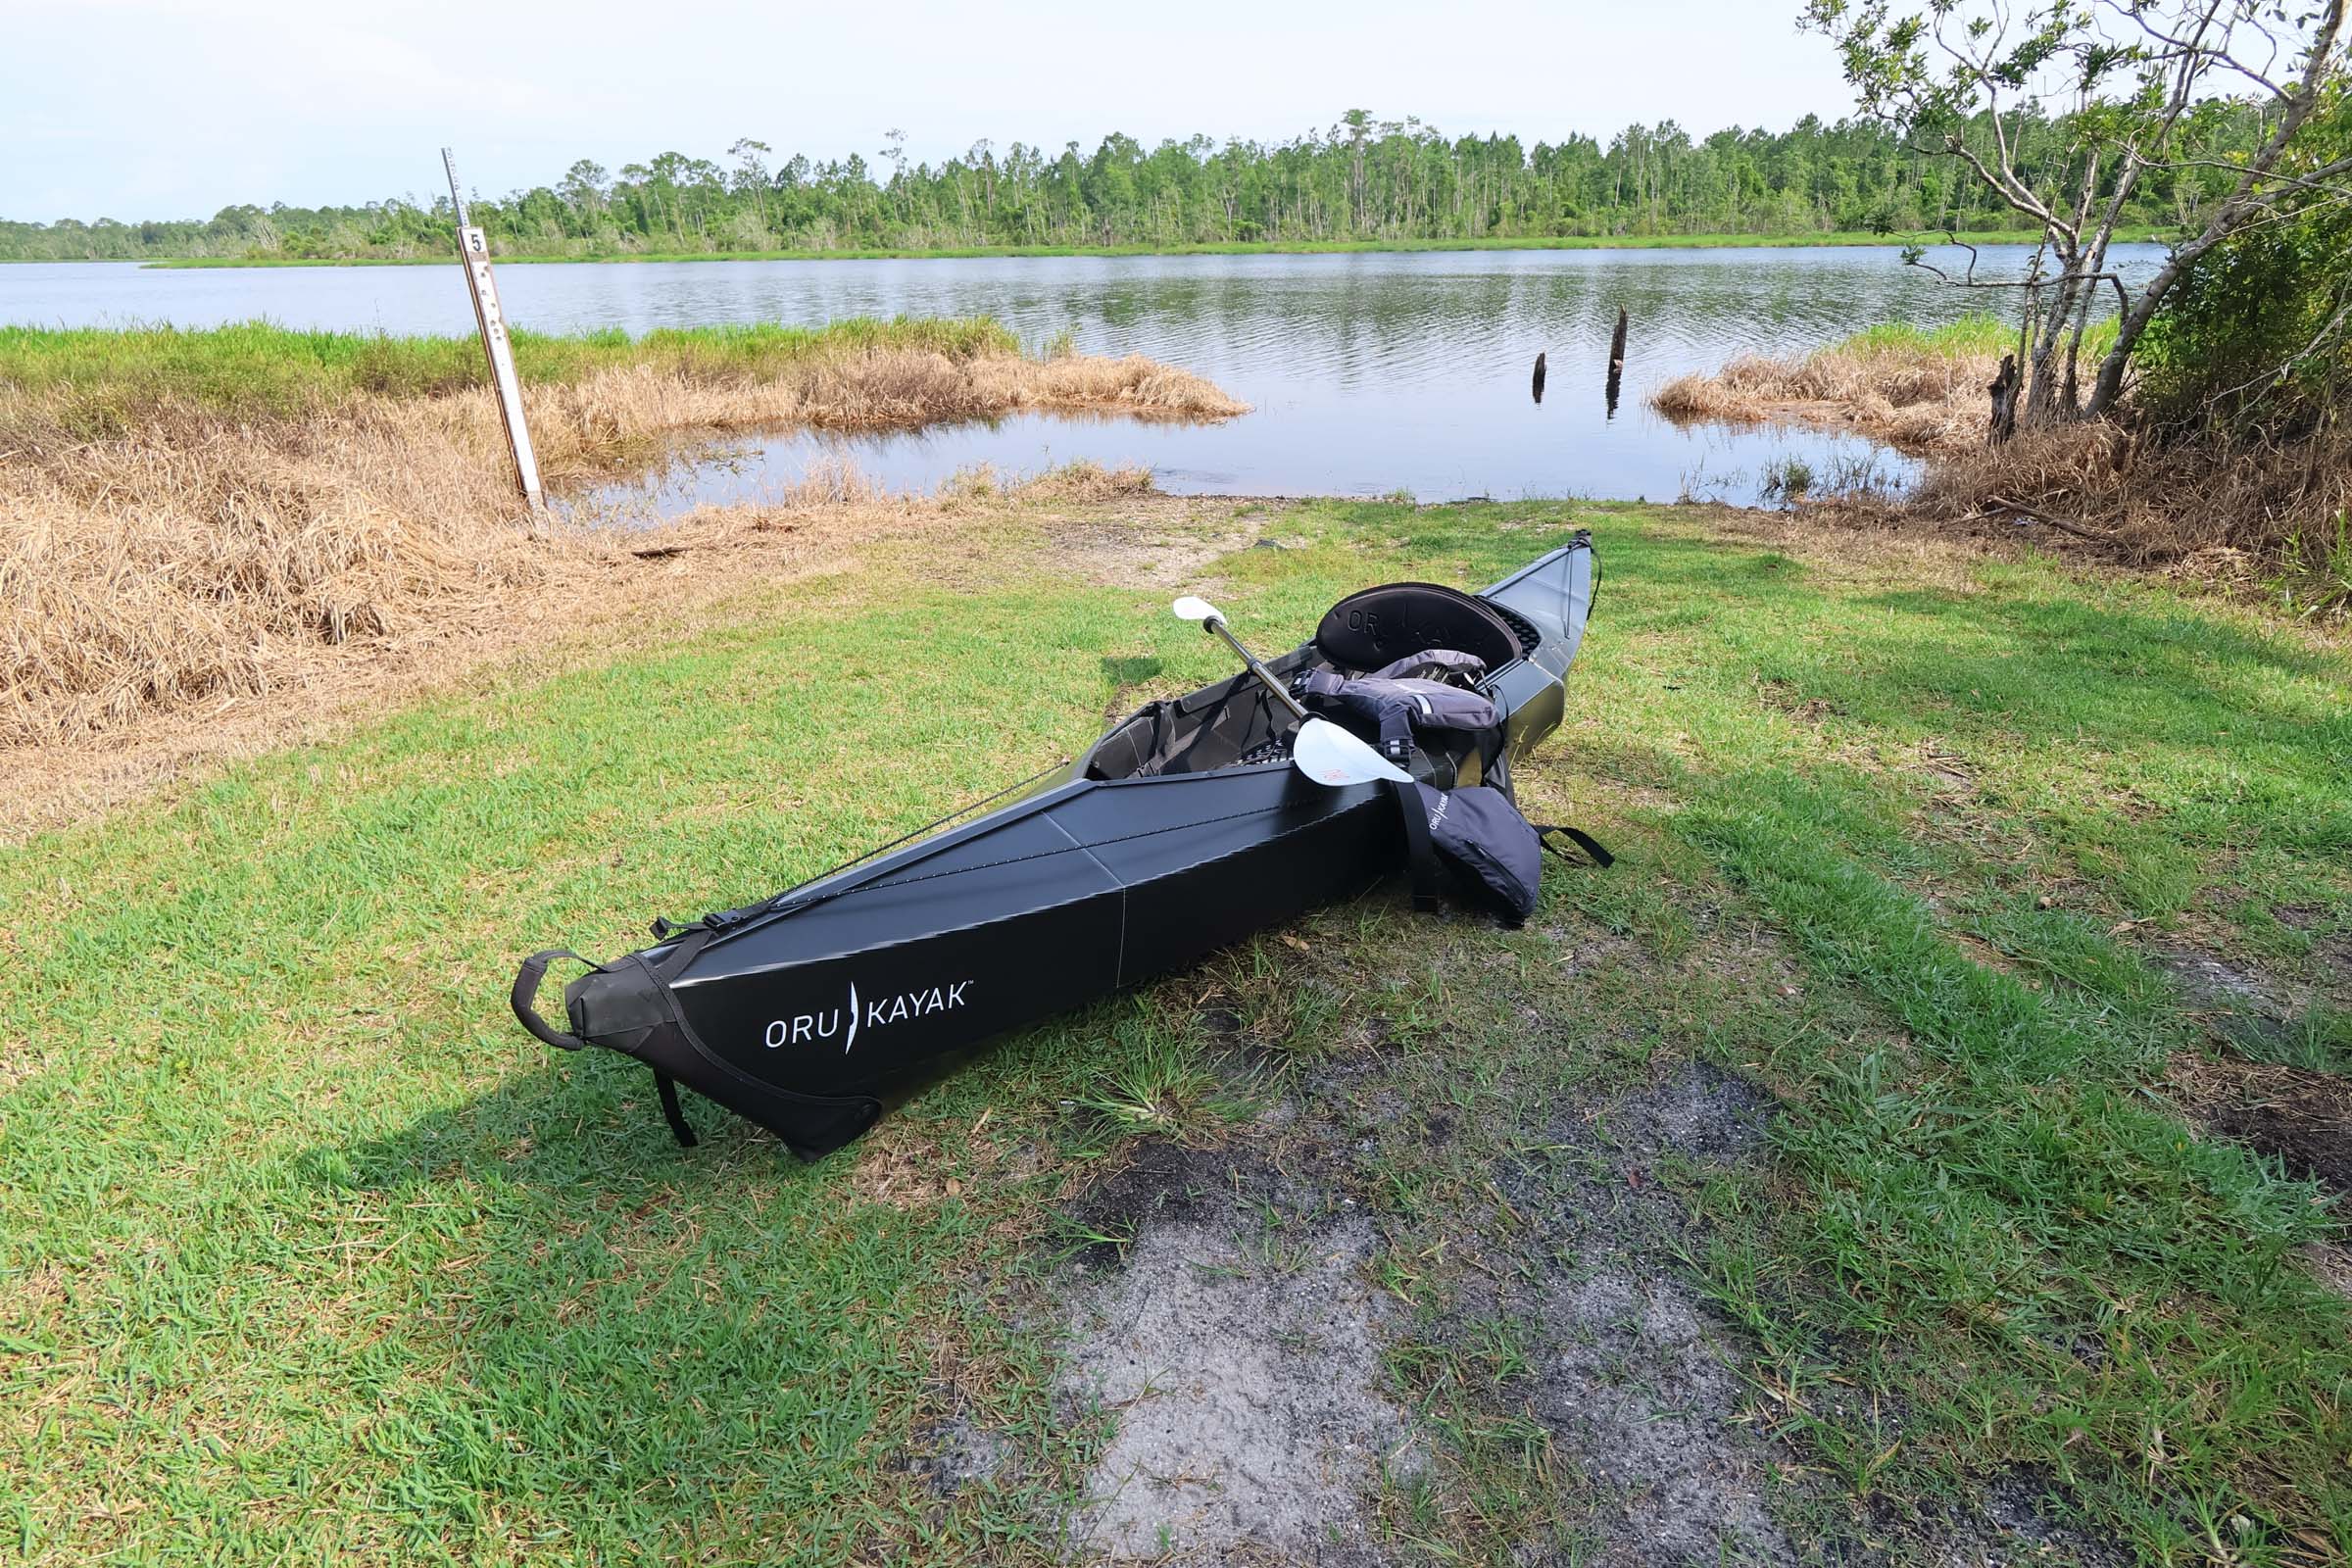 A kayak in front of a lake